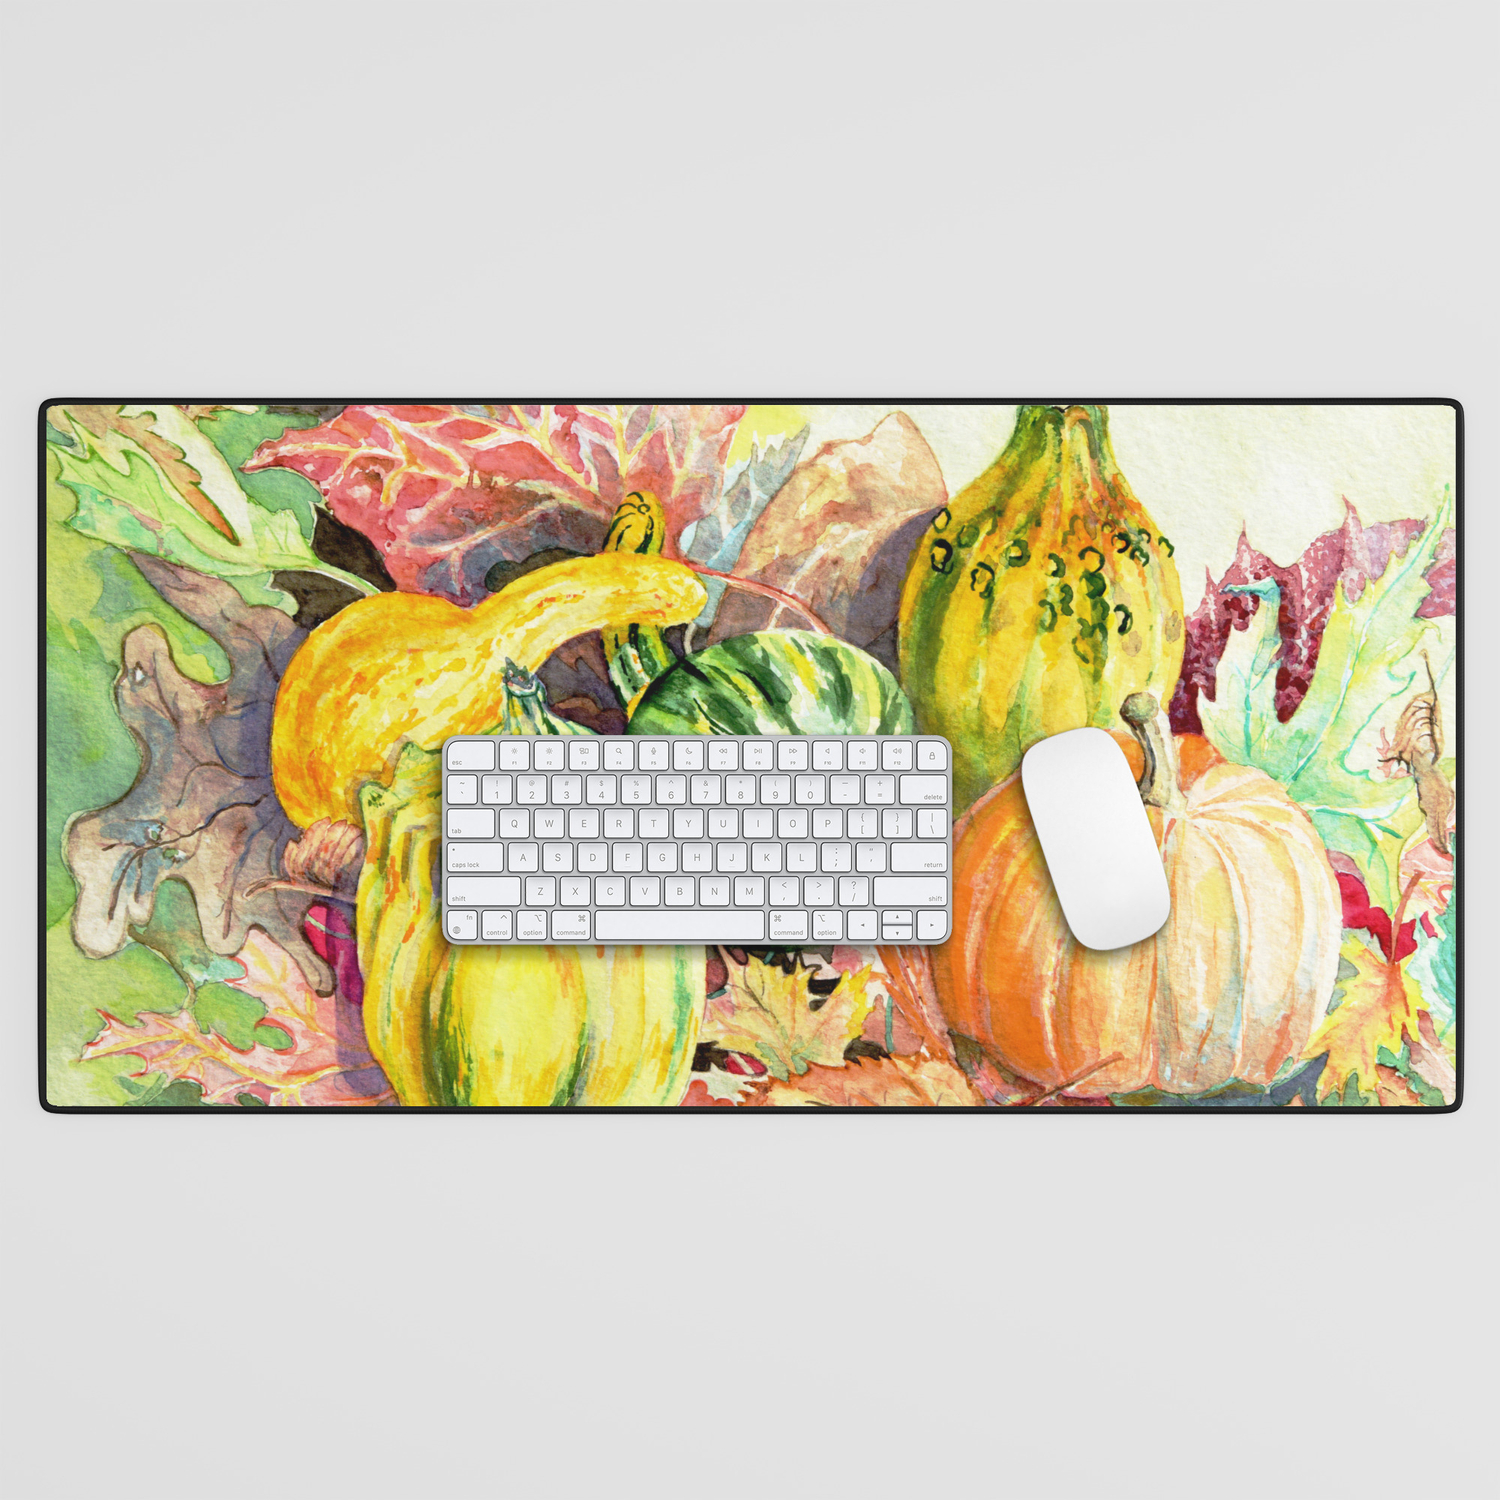 Large Pumpkins Fall/ Autumn Gourds Tapestry Pillow New Cornucopia Of Fruits 